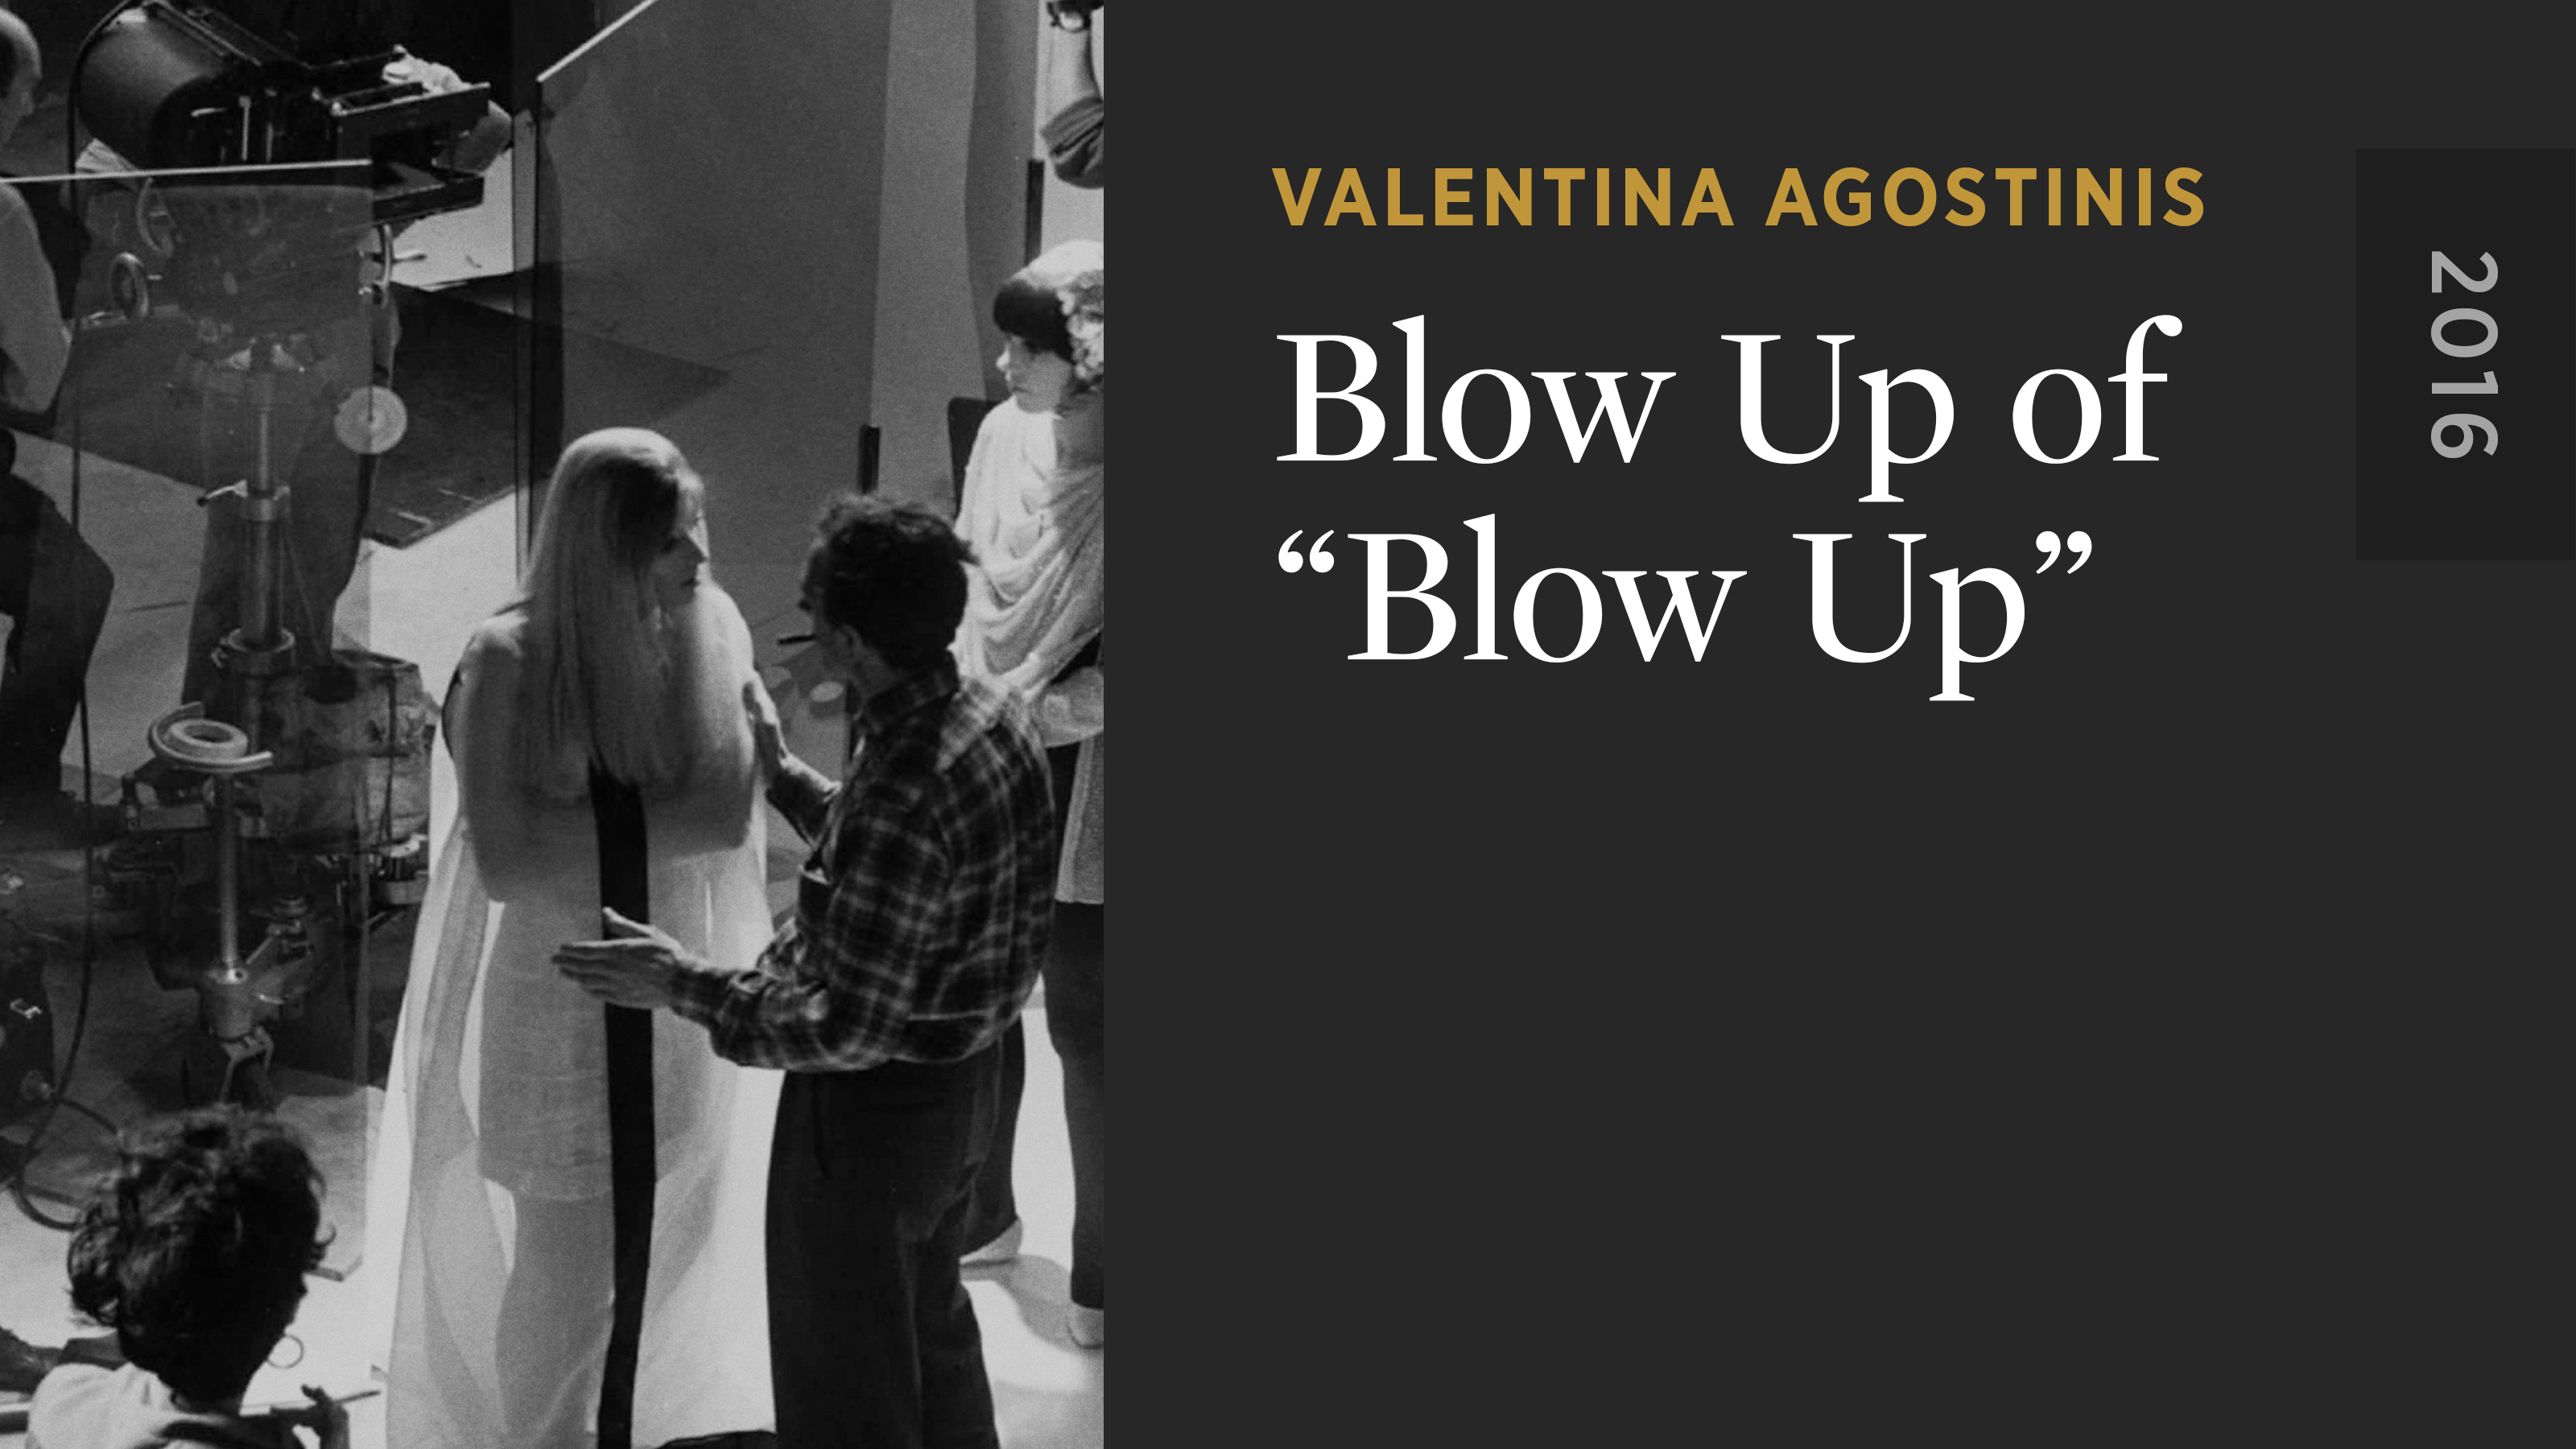 Blow Up of Blow Up - The Criterion Channel